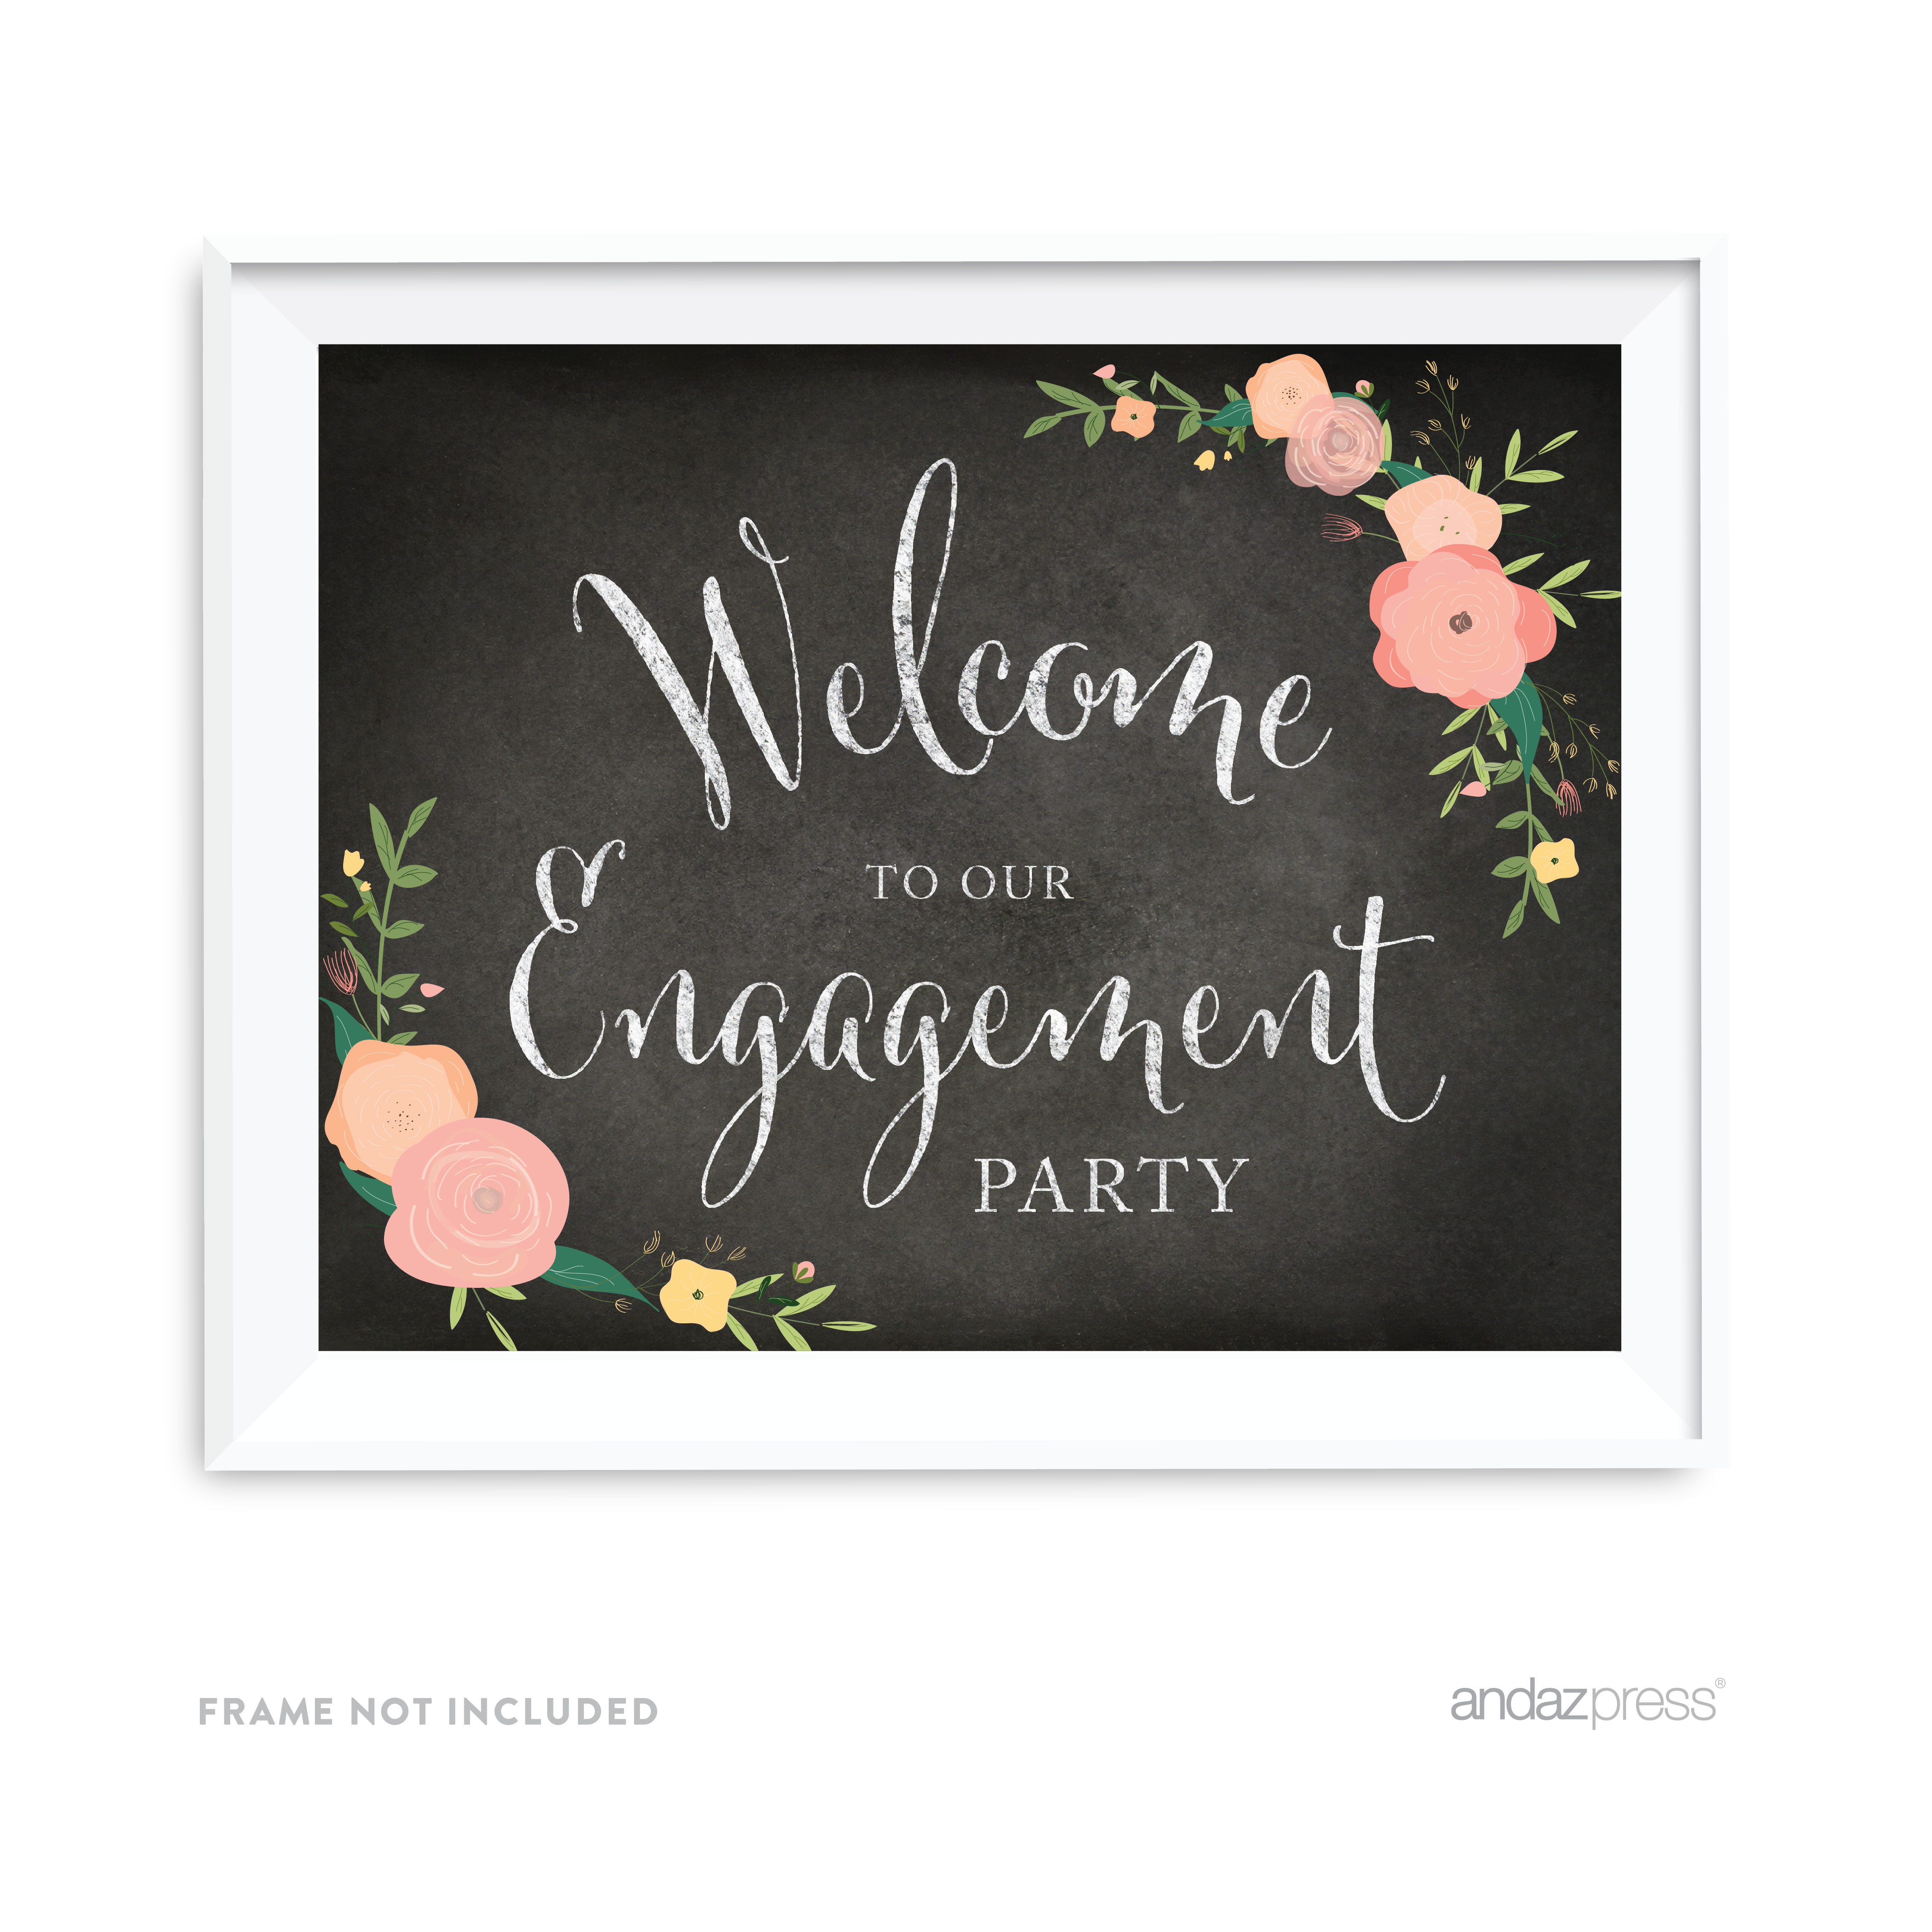 Bright Chalkboard Style Welcome To Our Engagement Party Wedding Sign 